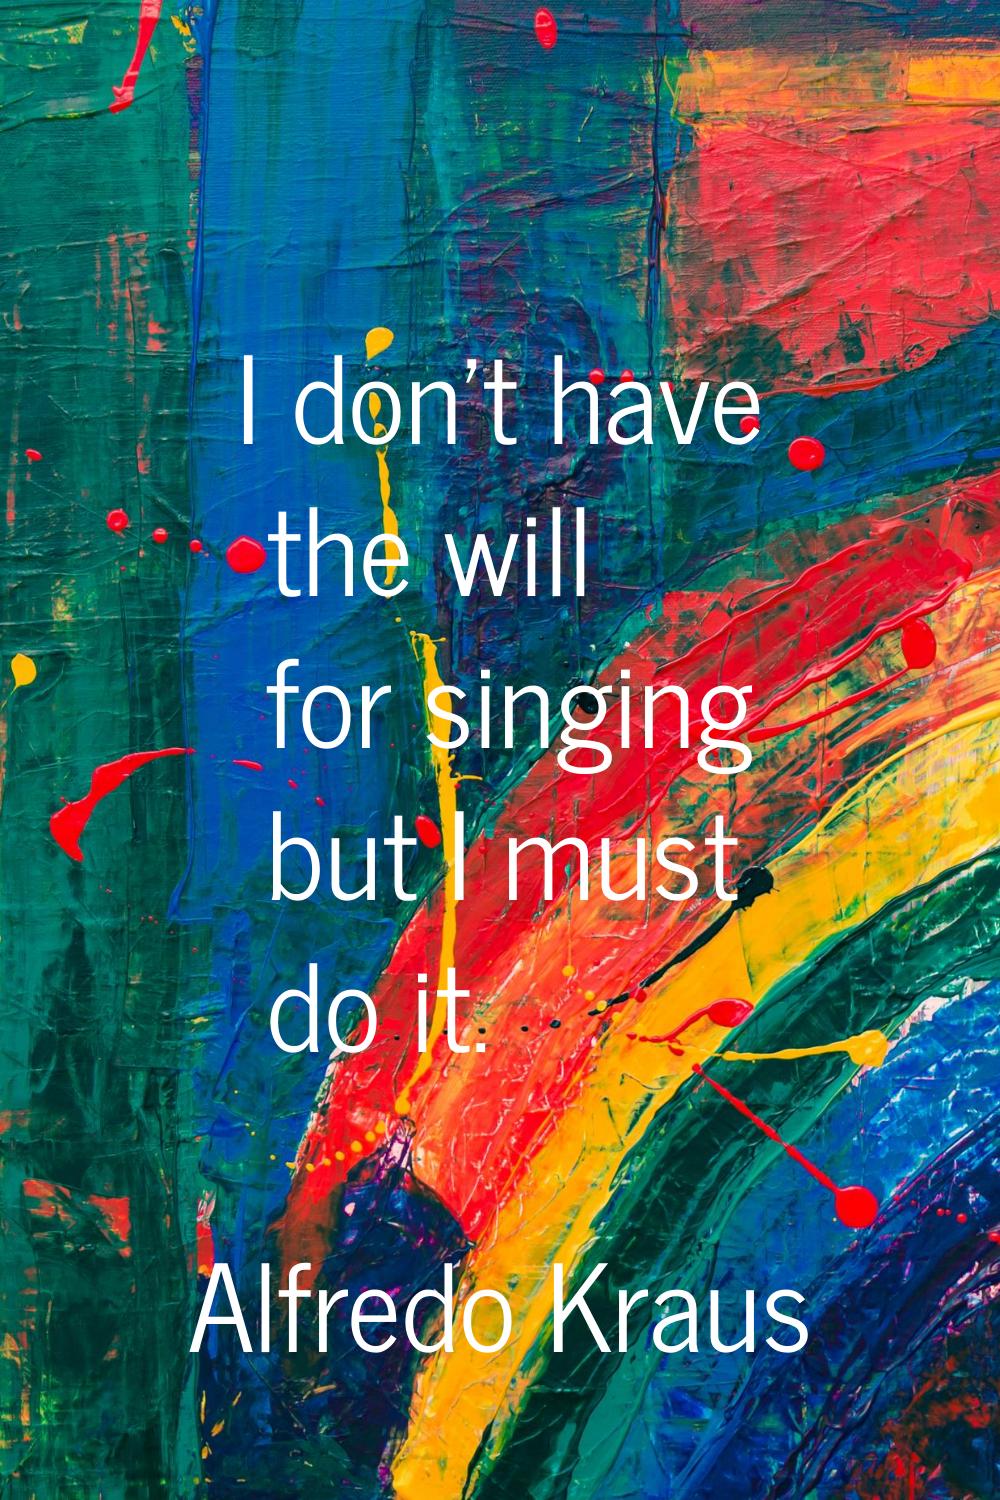 I don't have the will for singing but I must do it.